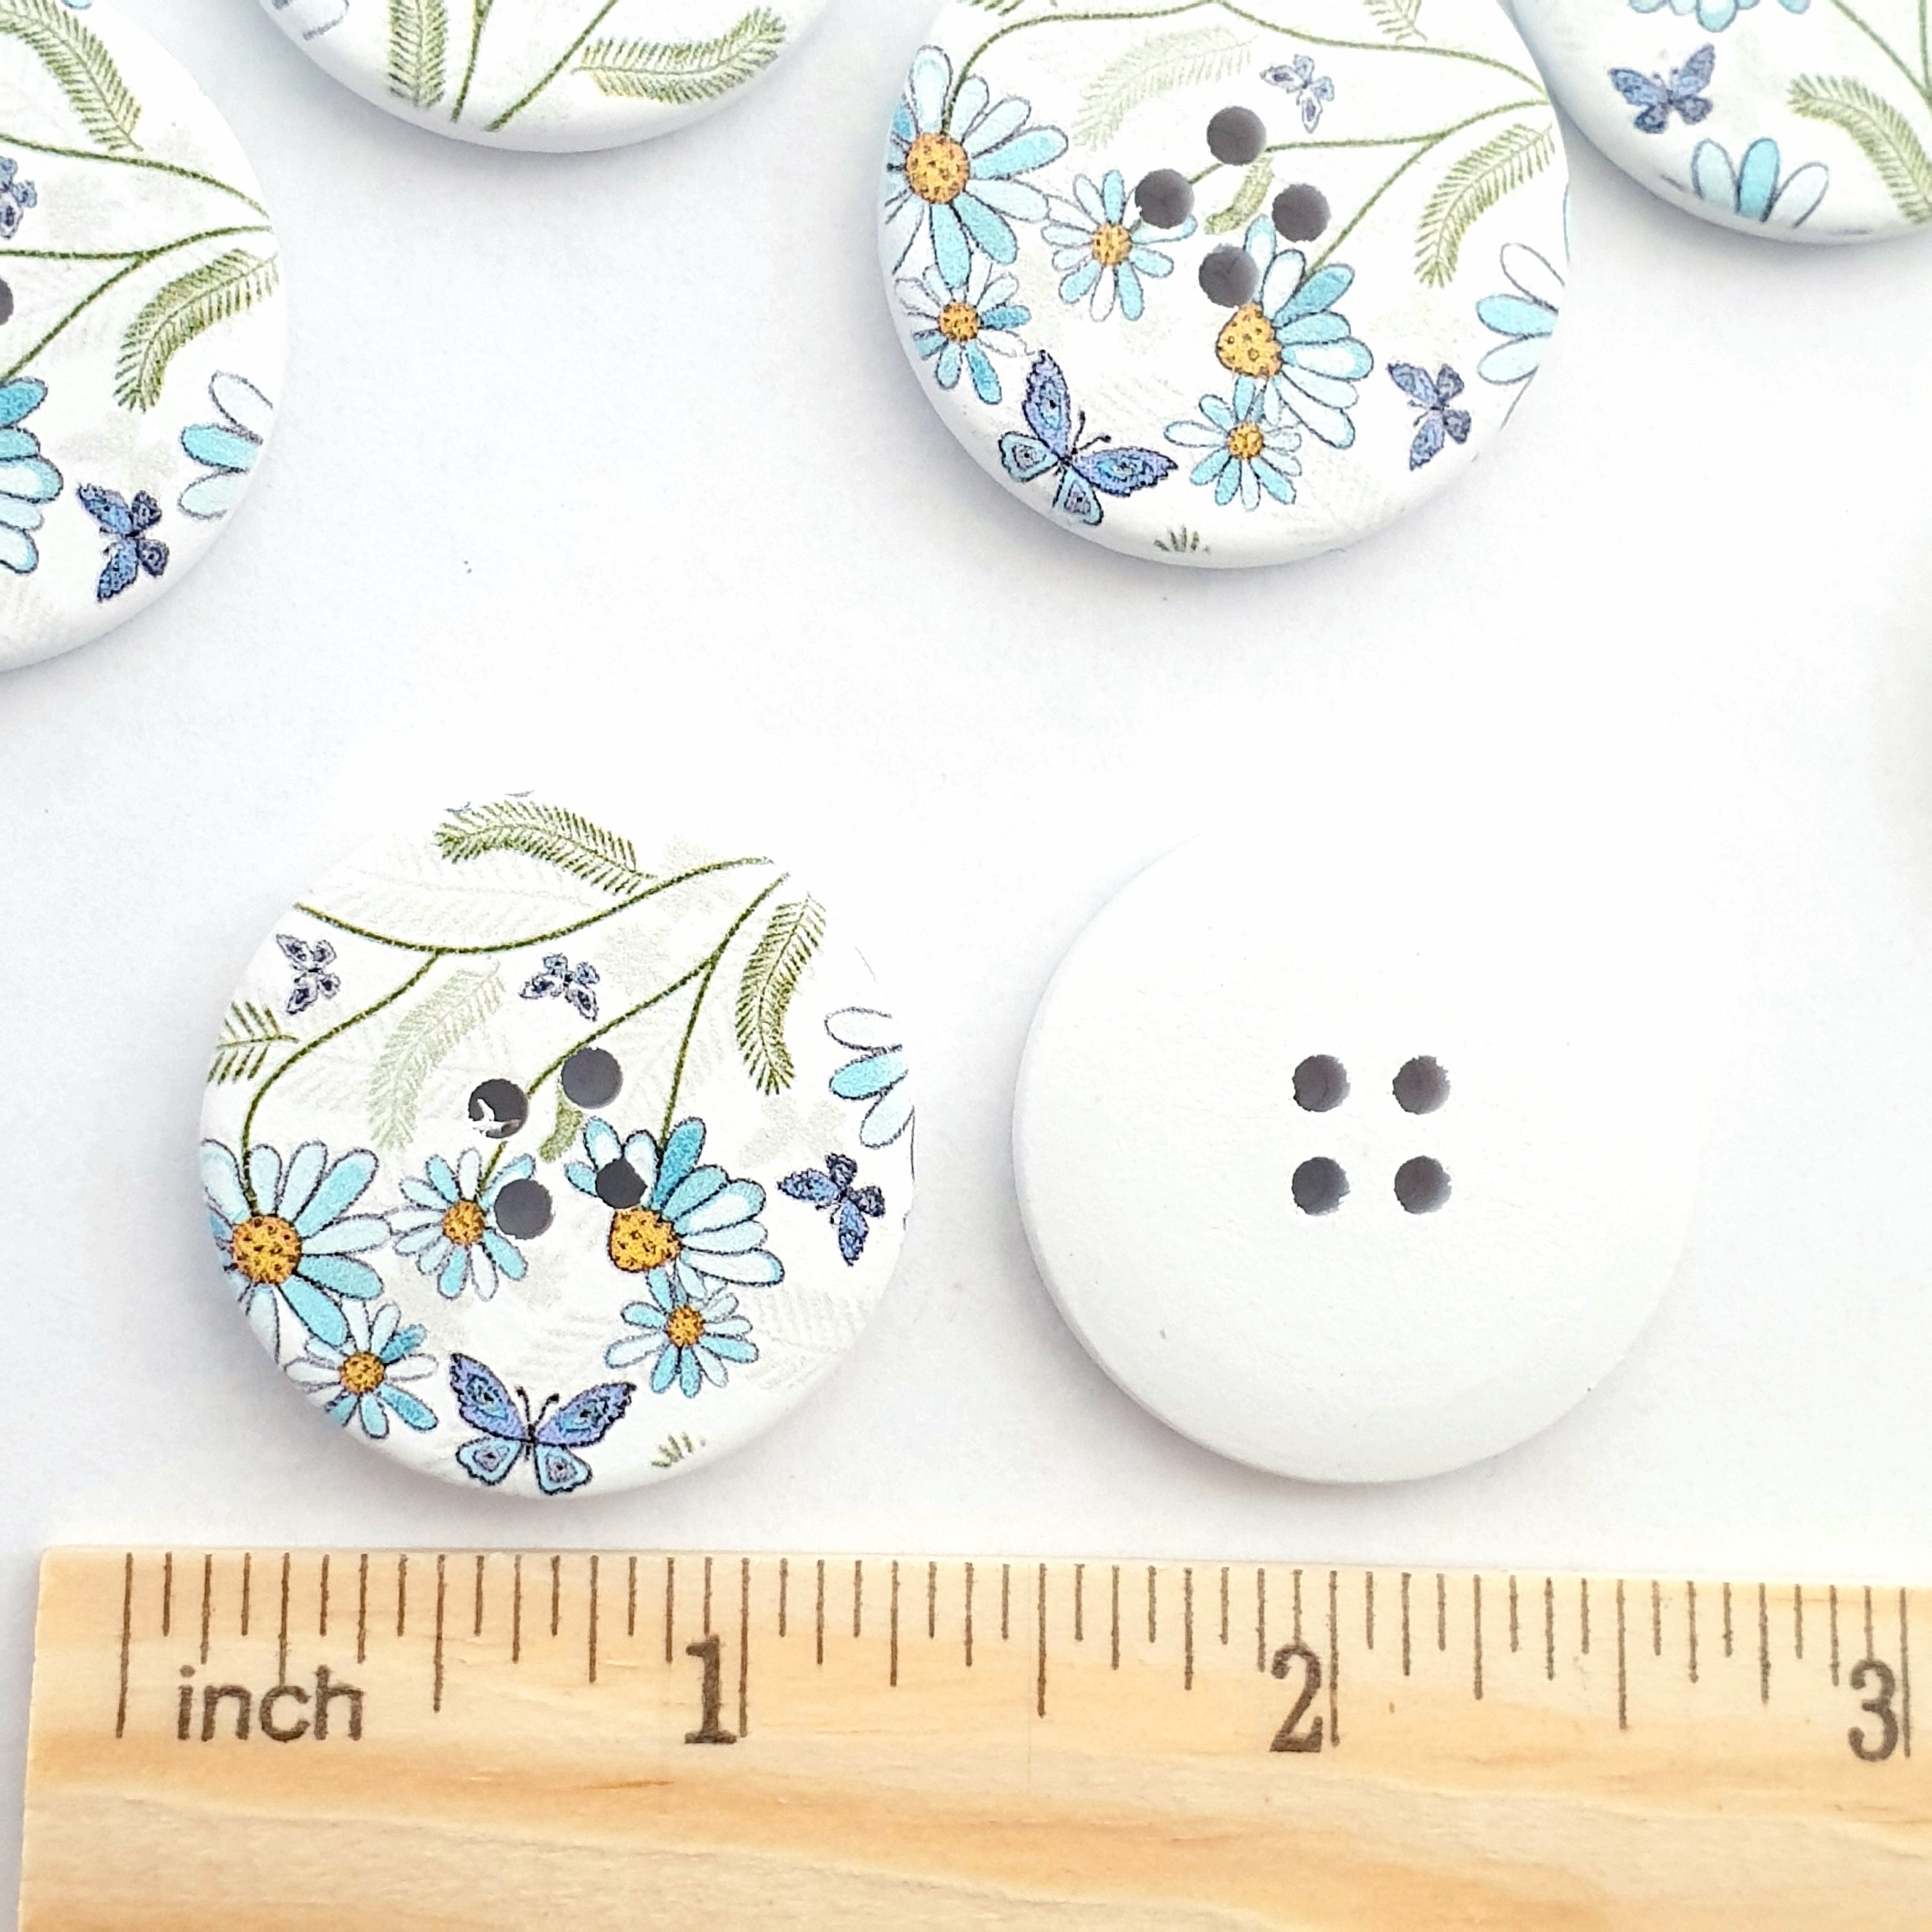 MajorCrafts 16pcs 30mm Blue and White Spring Flower Design 4 Holes Large Wooden Sewing Buttons